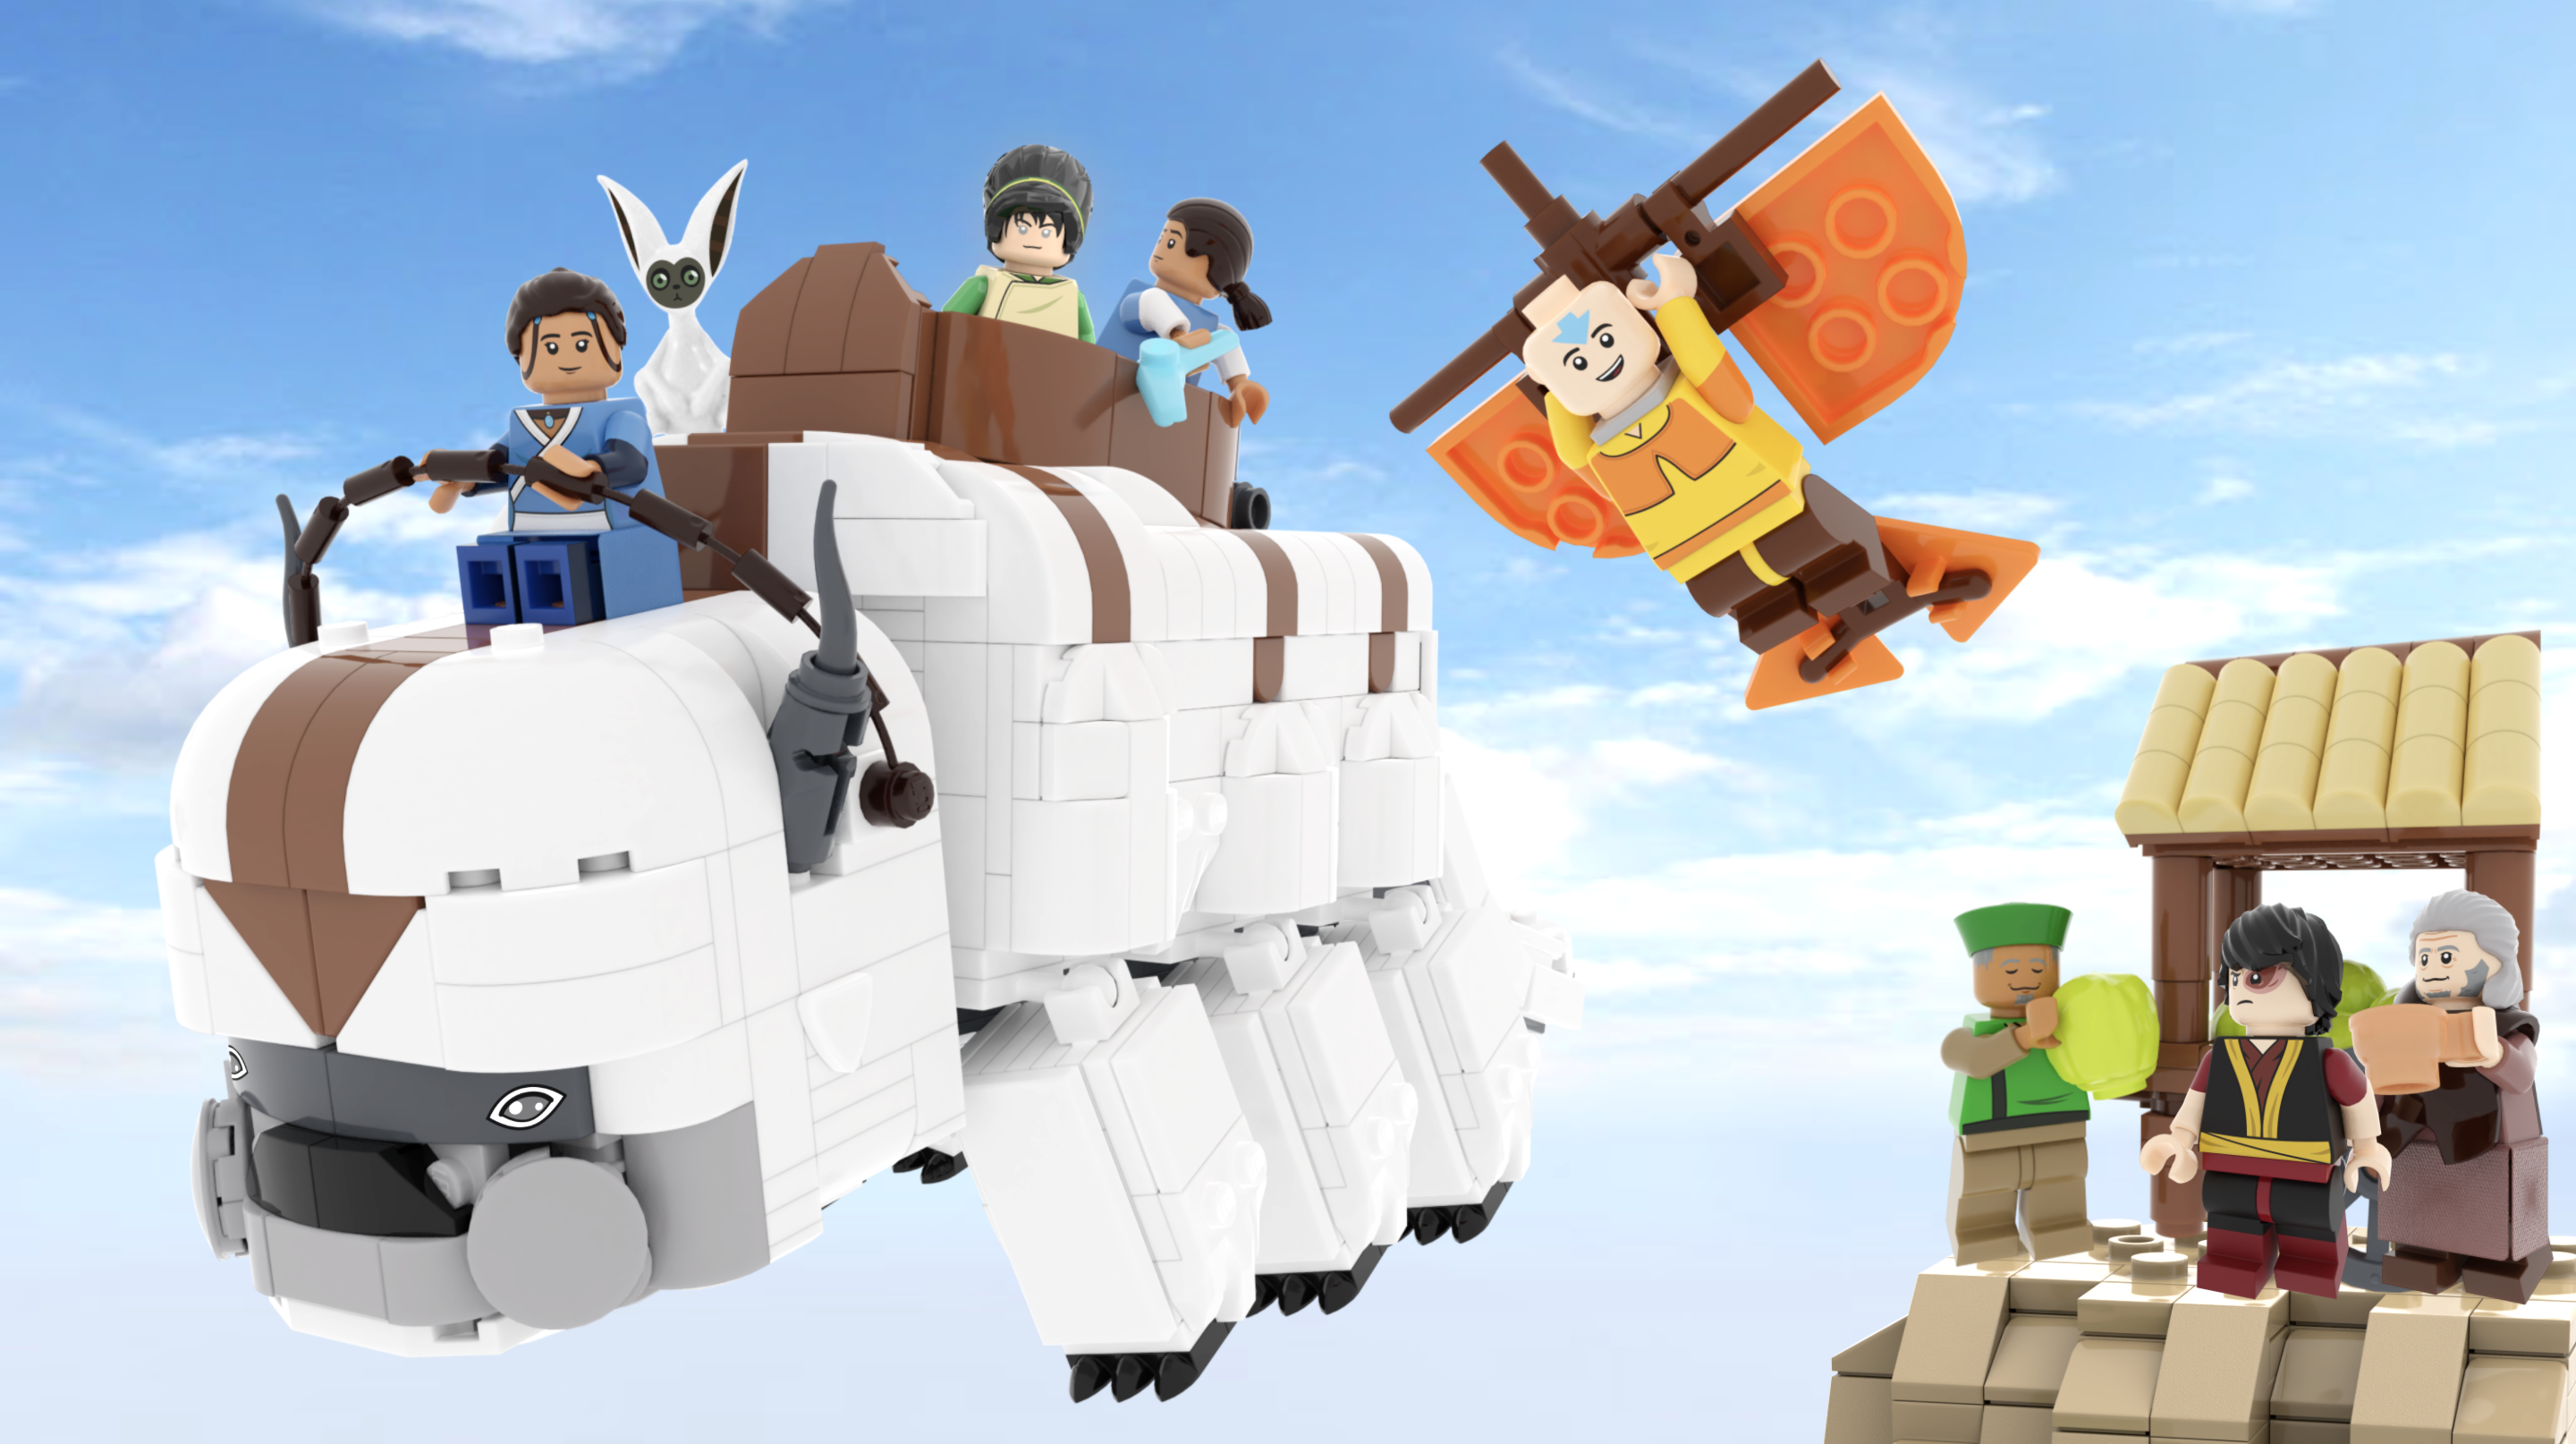 YIP YIP Team Avatar My Lego Avatar The Last Airbender project is almost  to 2000 supporters on Lego Ideas With 10000 votes it could actually  become a real set Please consider supporting